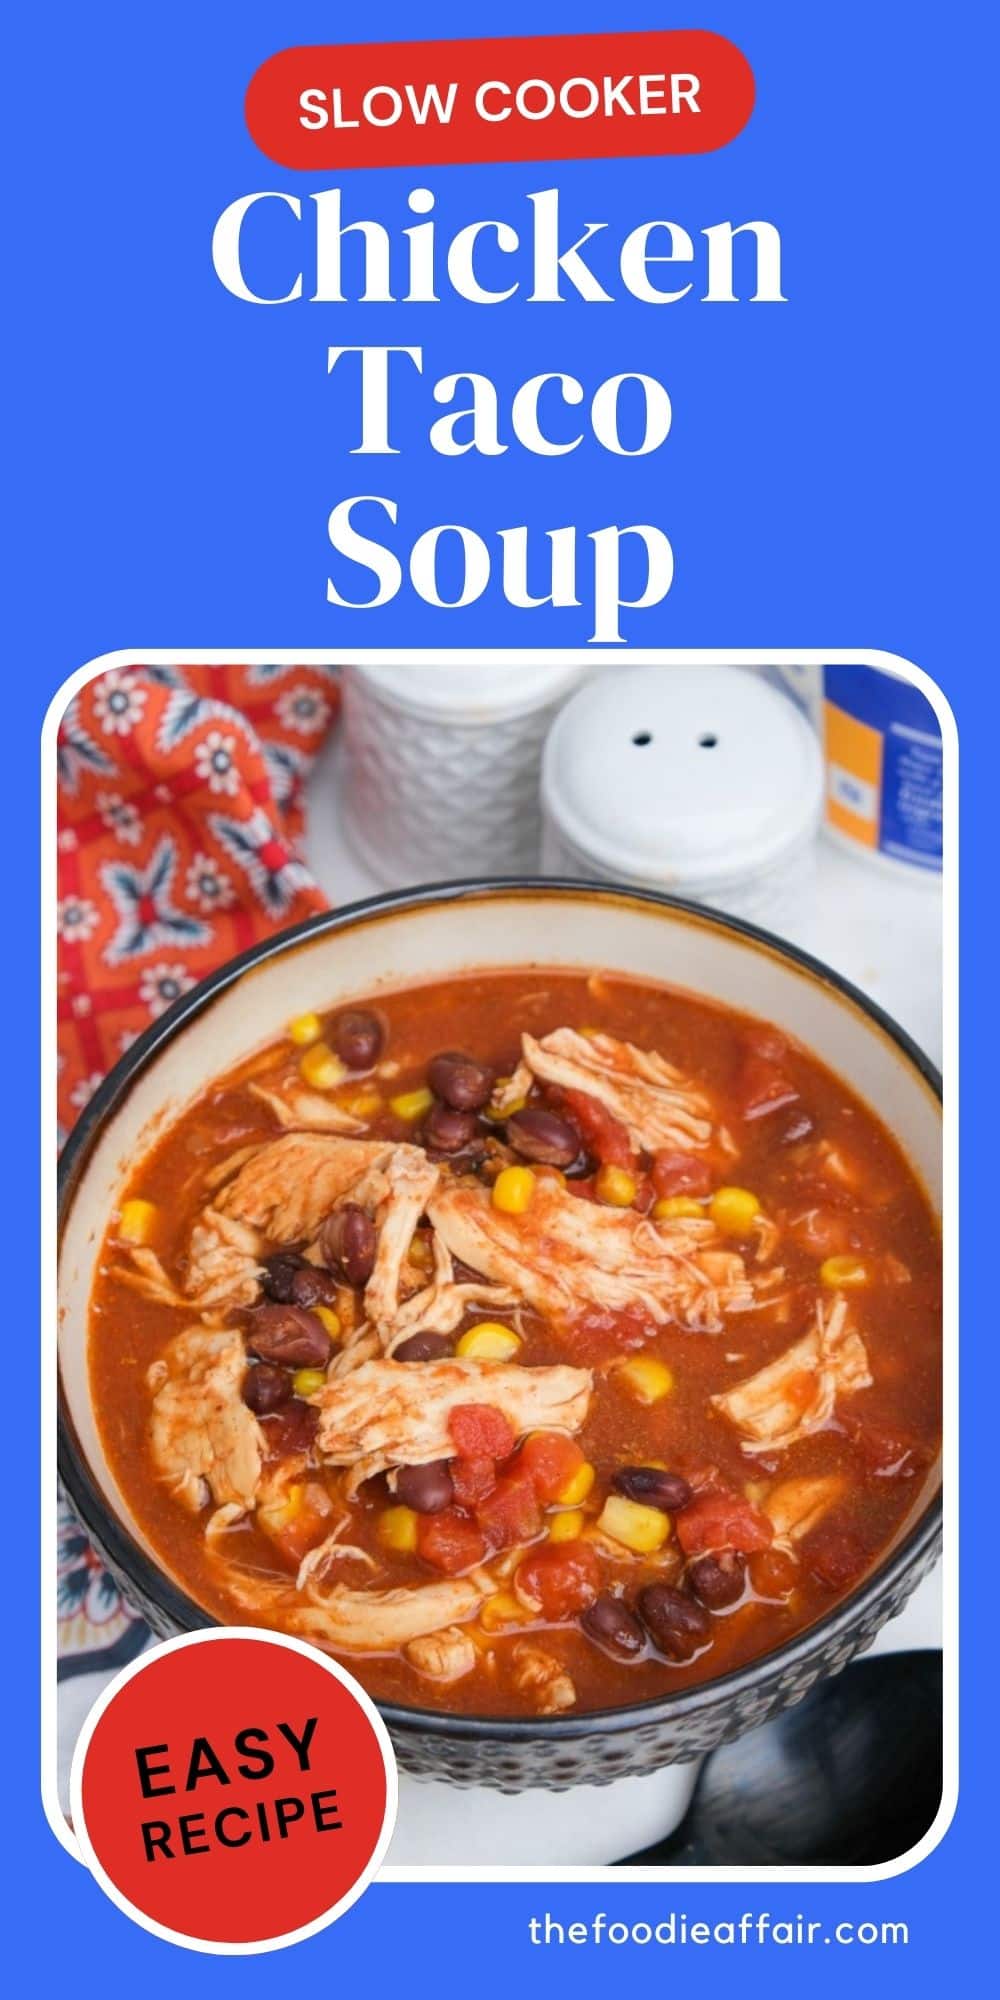 Simple Slow Cooker Chicken Taco Soup Recipe - The Foodie Affair